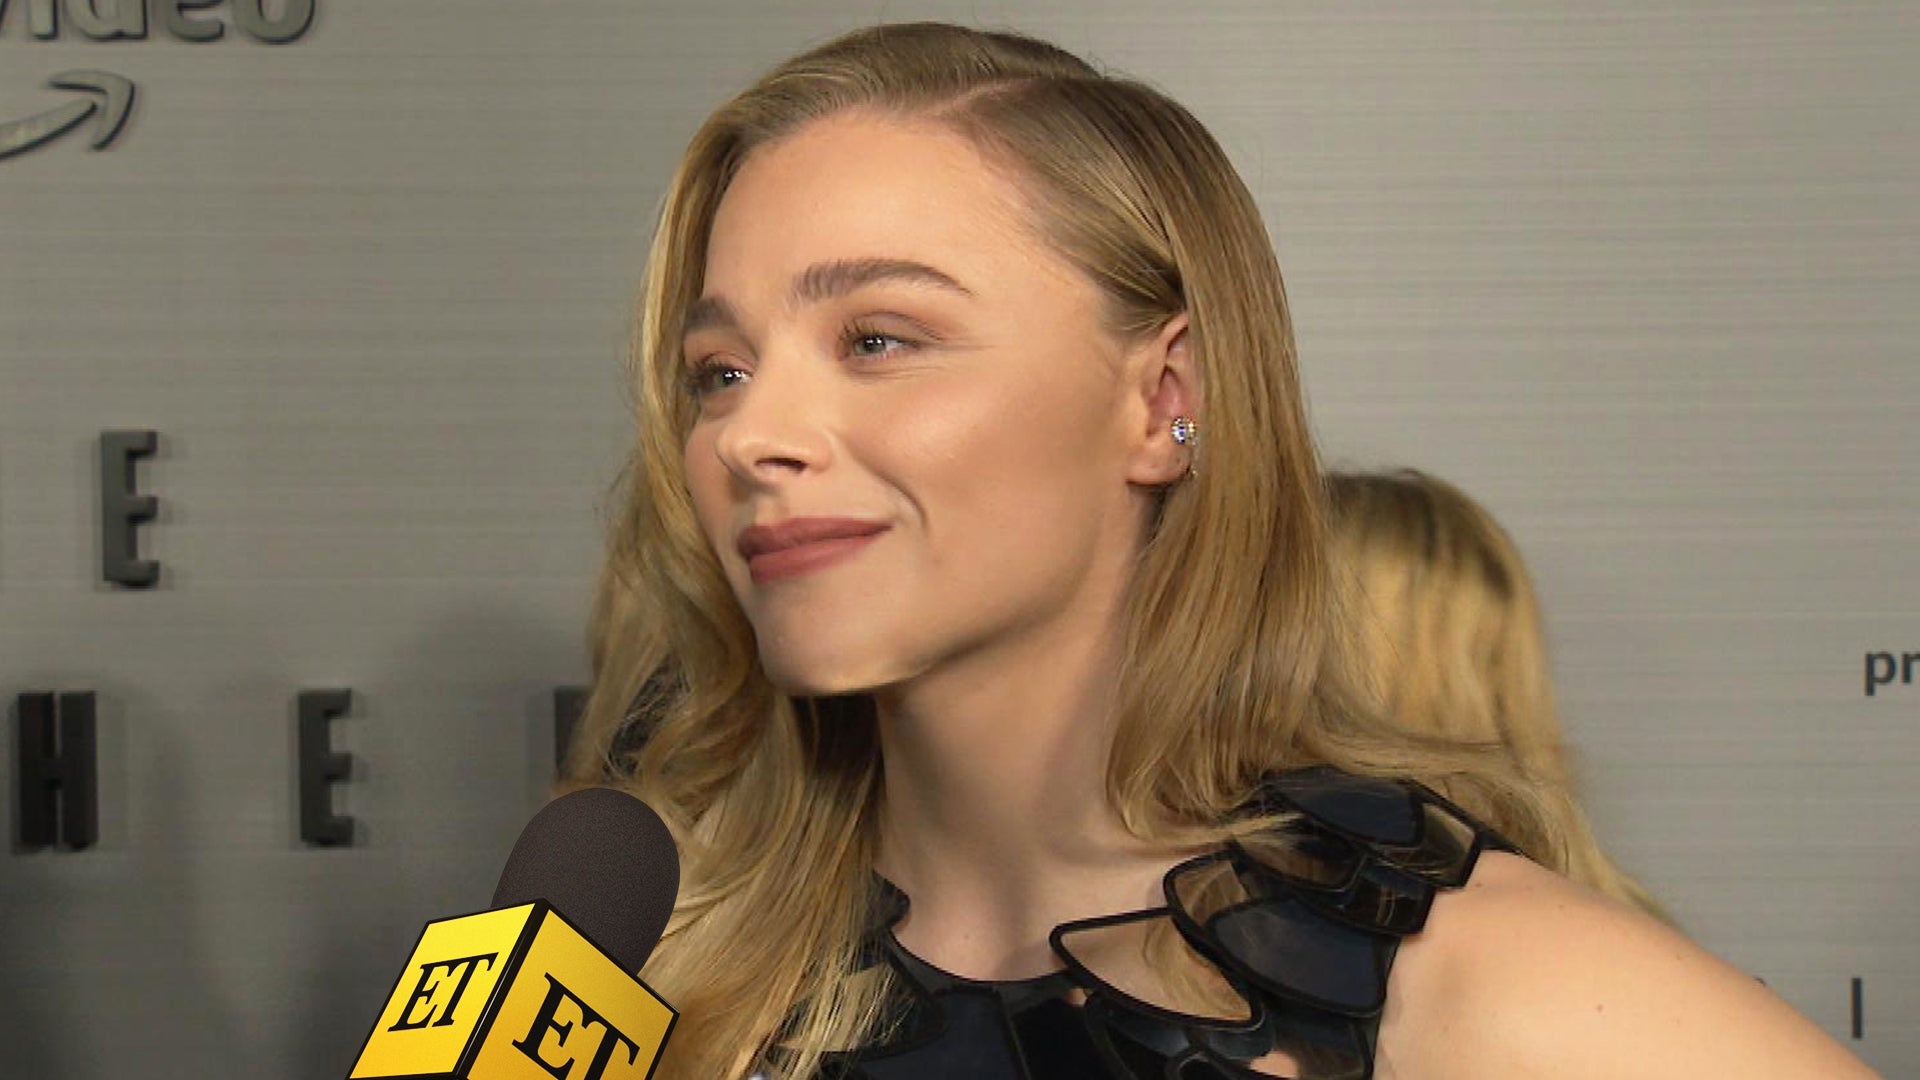 Chloe Grace Moretz says Family Guy meme affects her to this day